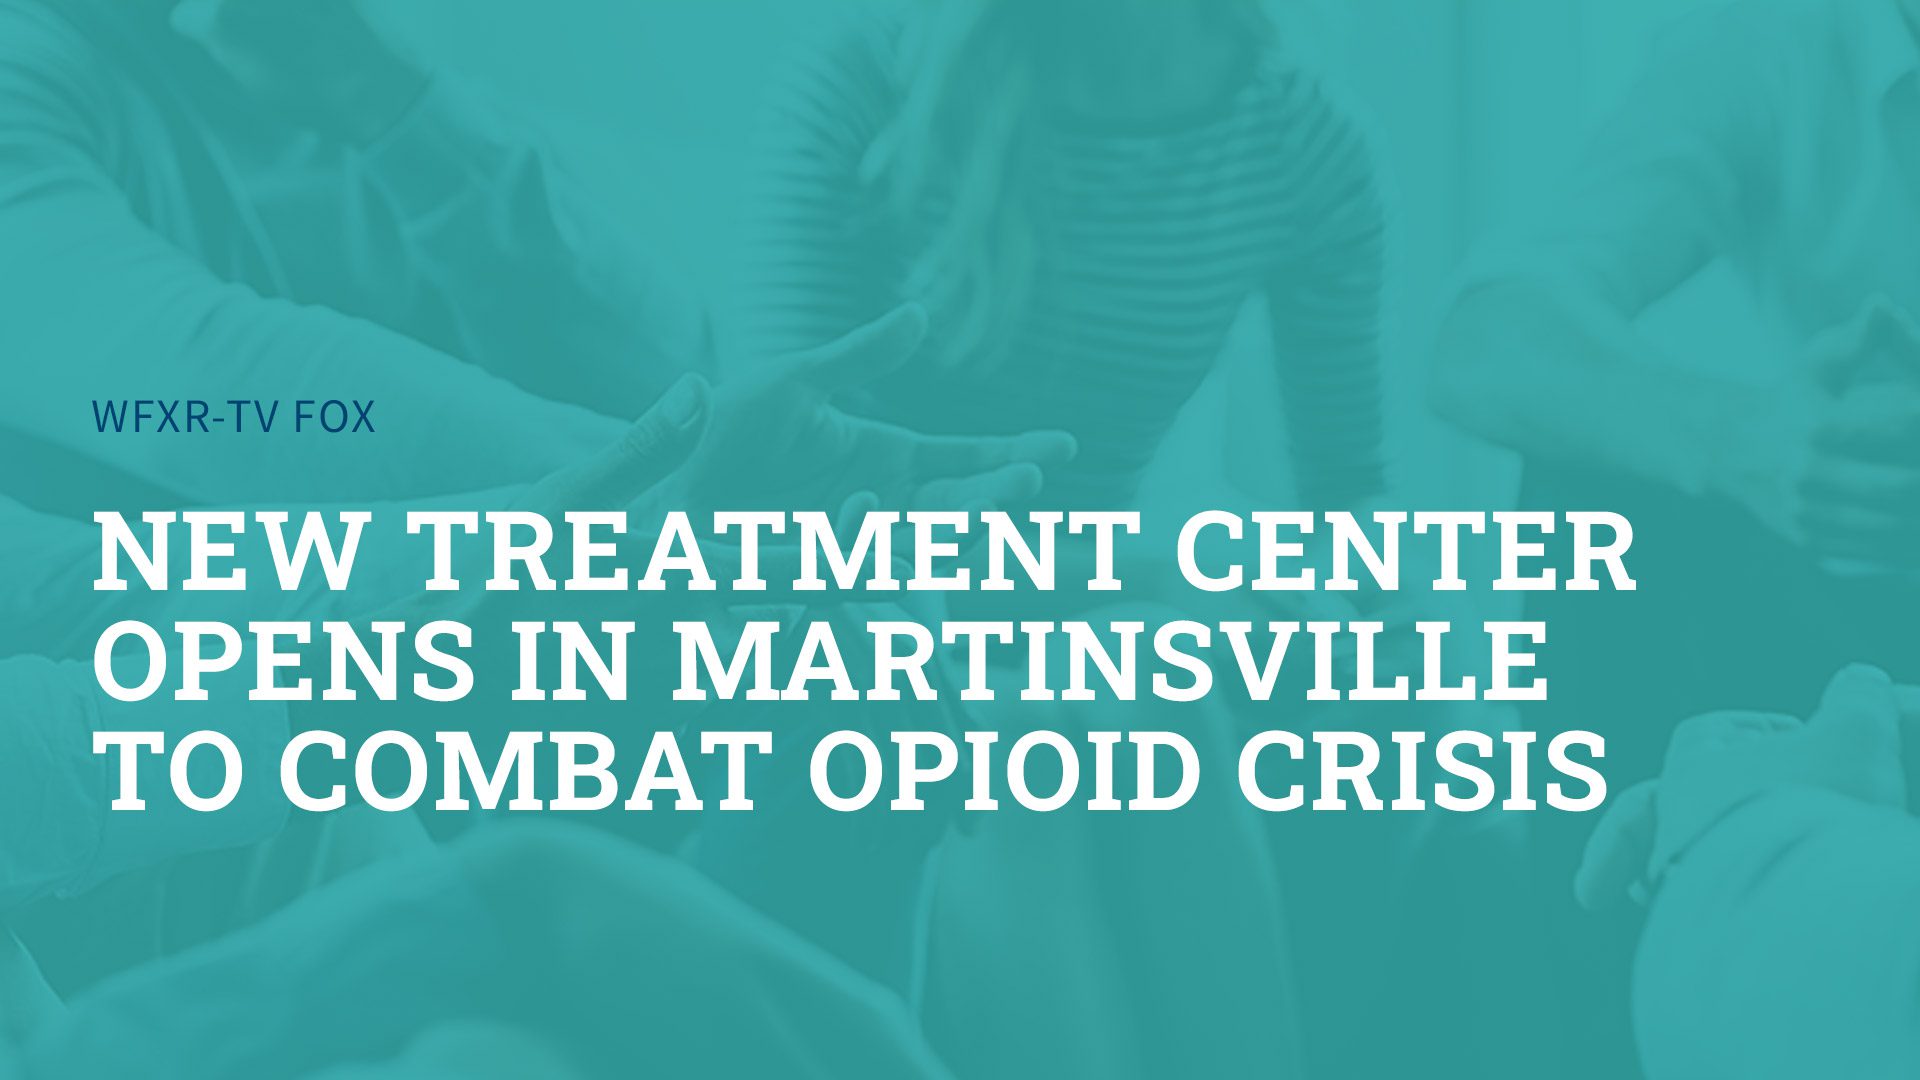 New Addiction Treatment Center Opens in Martinsville to Combat Opioid Crisis